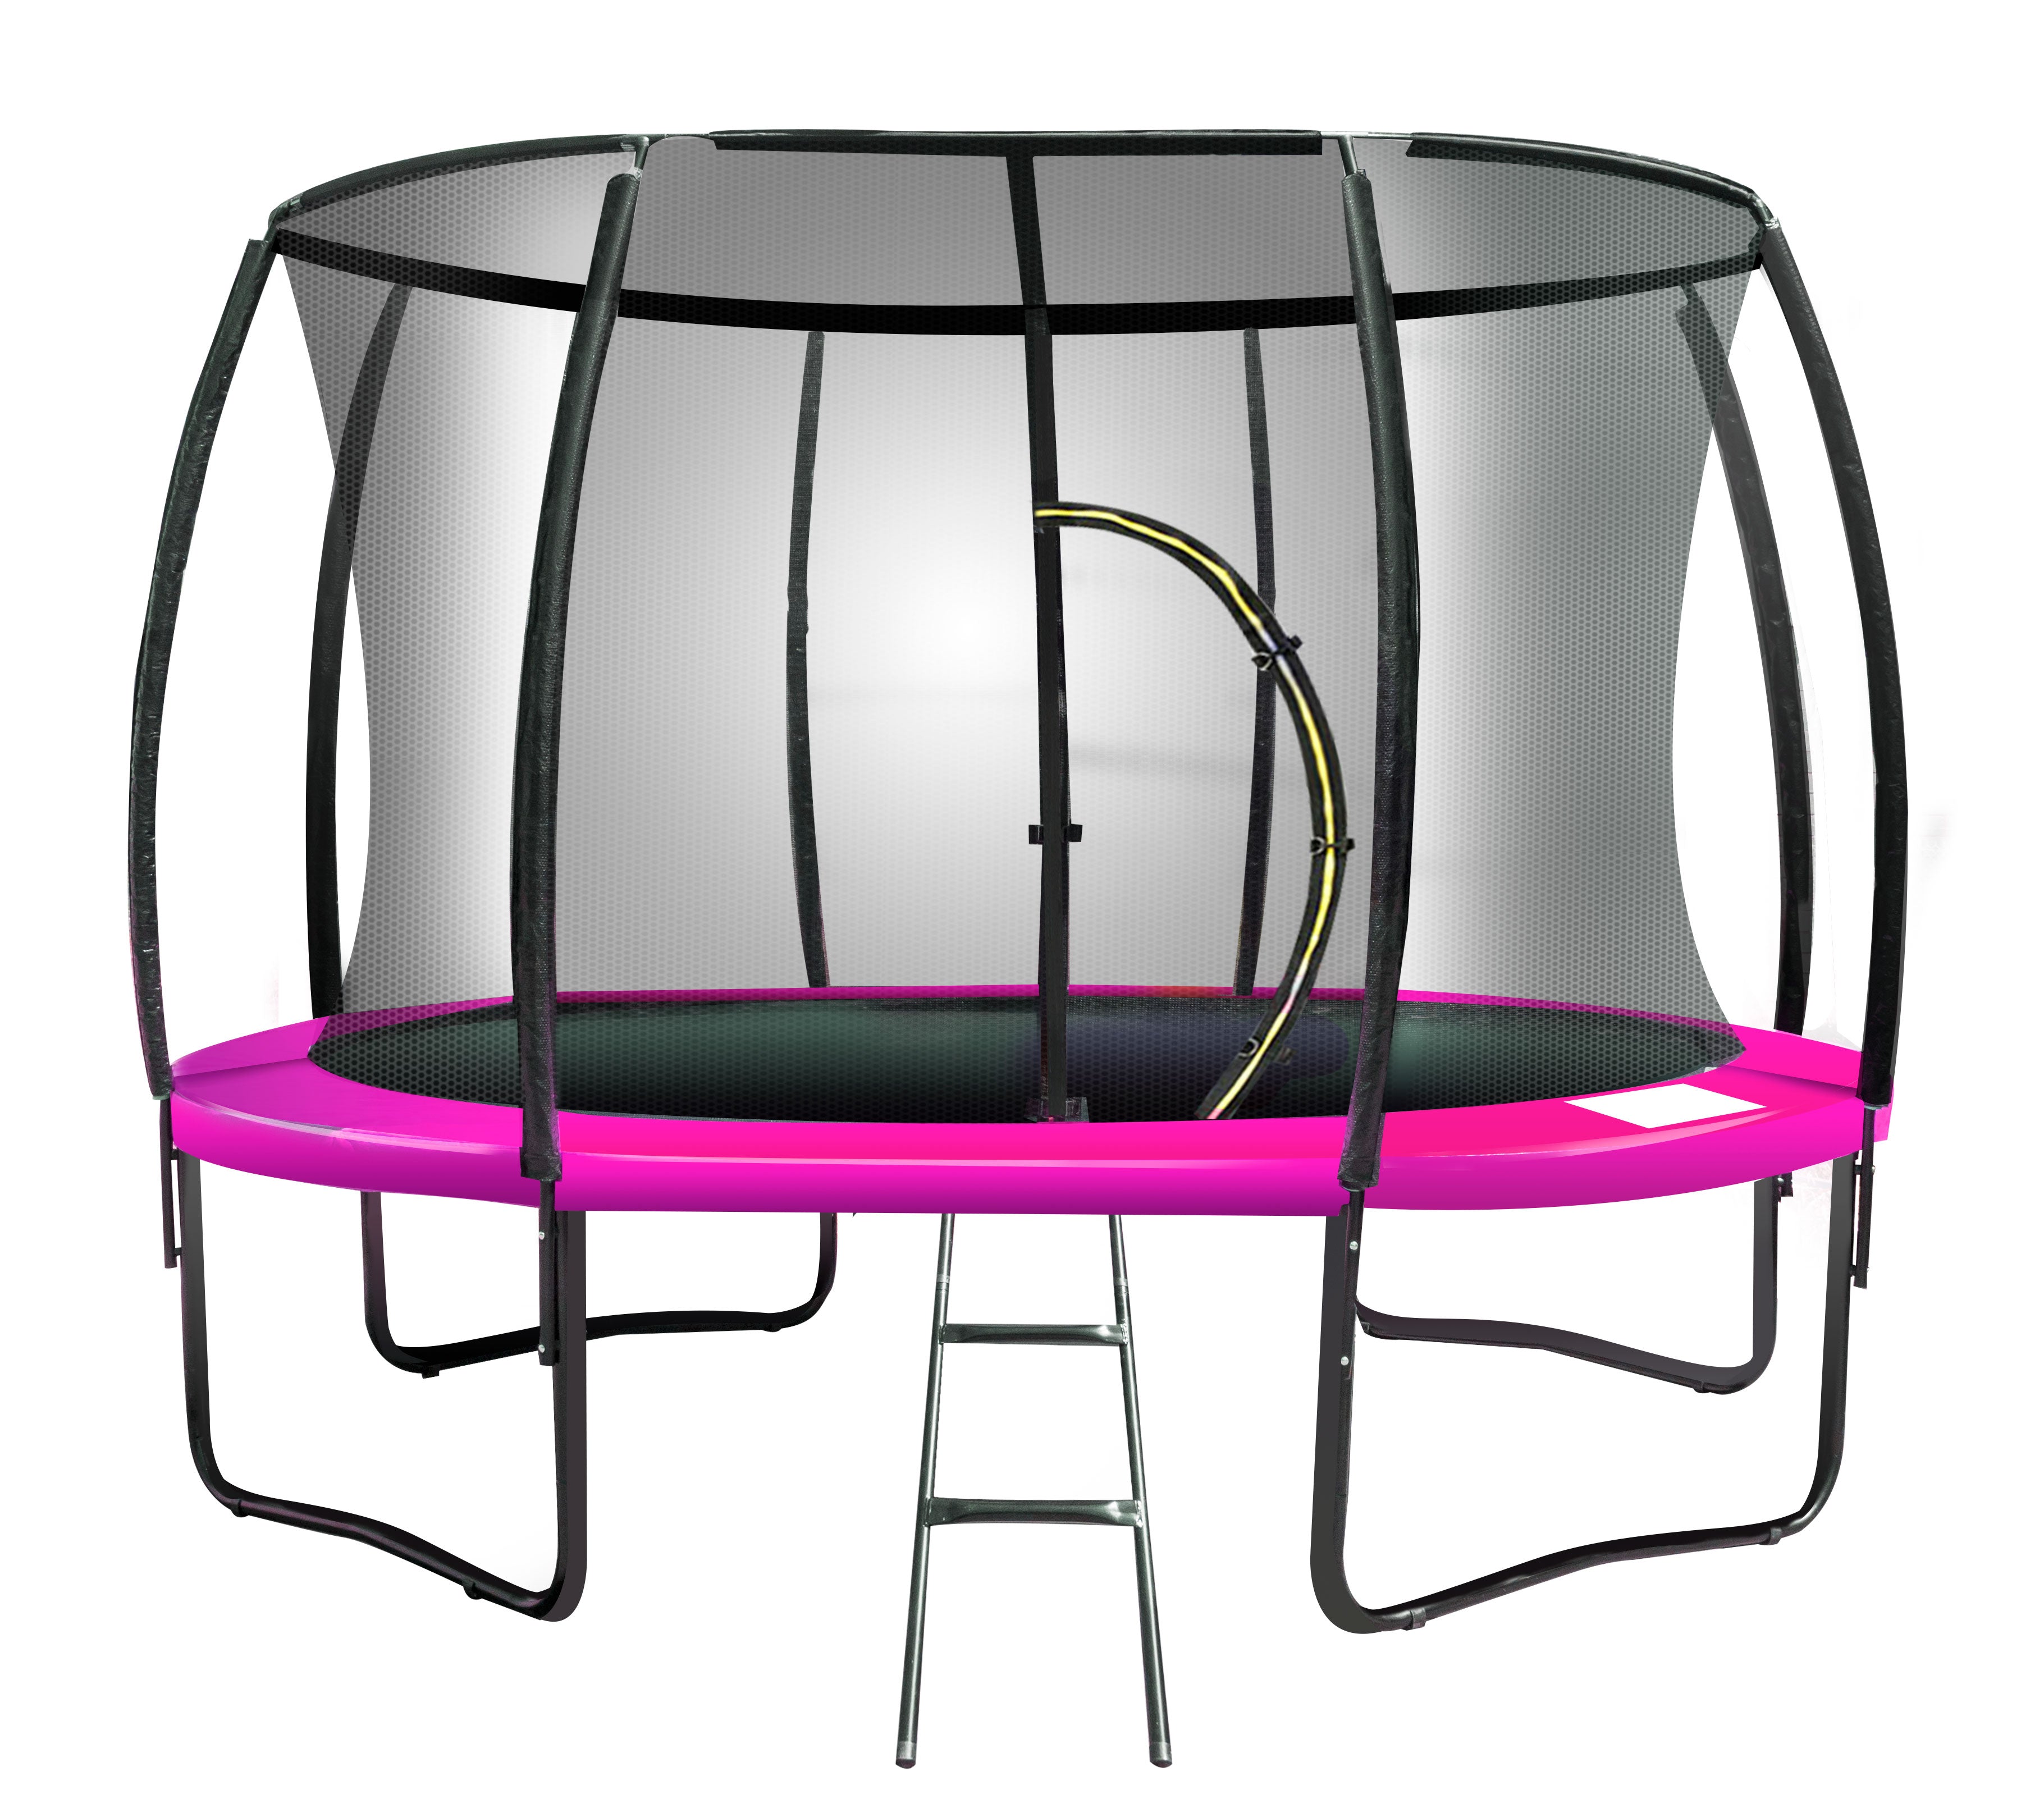 Kahuna 16ft Trampoline Free Ladder Spring Mat Net Safety Pad Cover Round Enclosure - Pink - SILBERSHELL